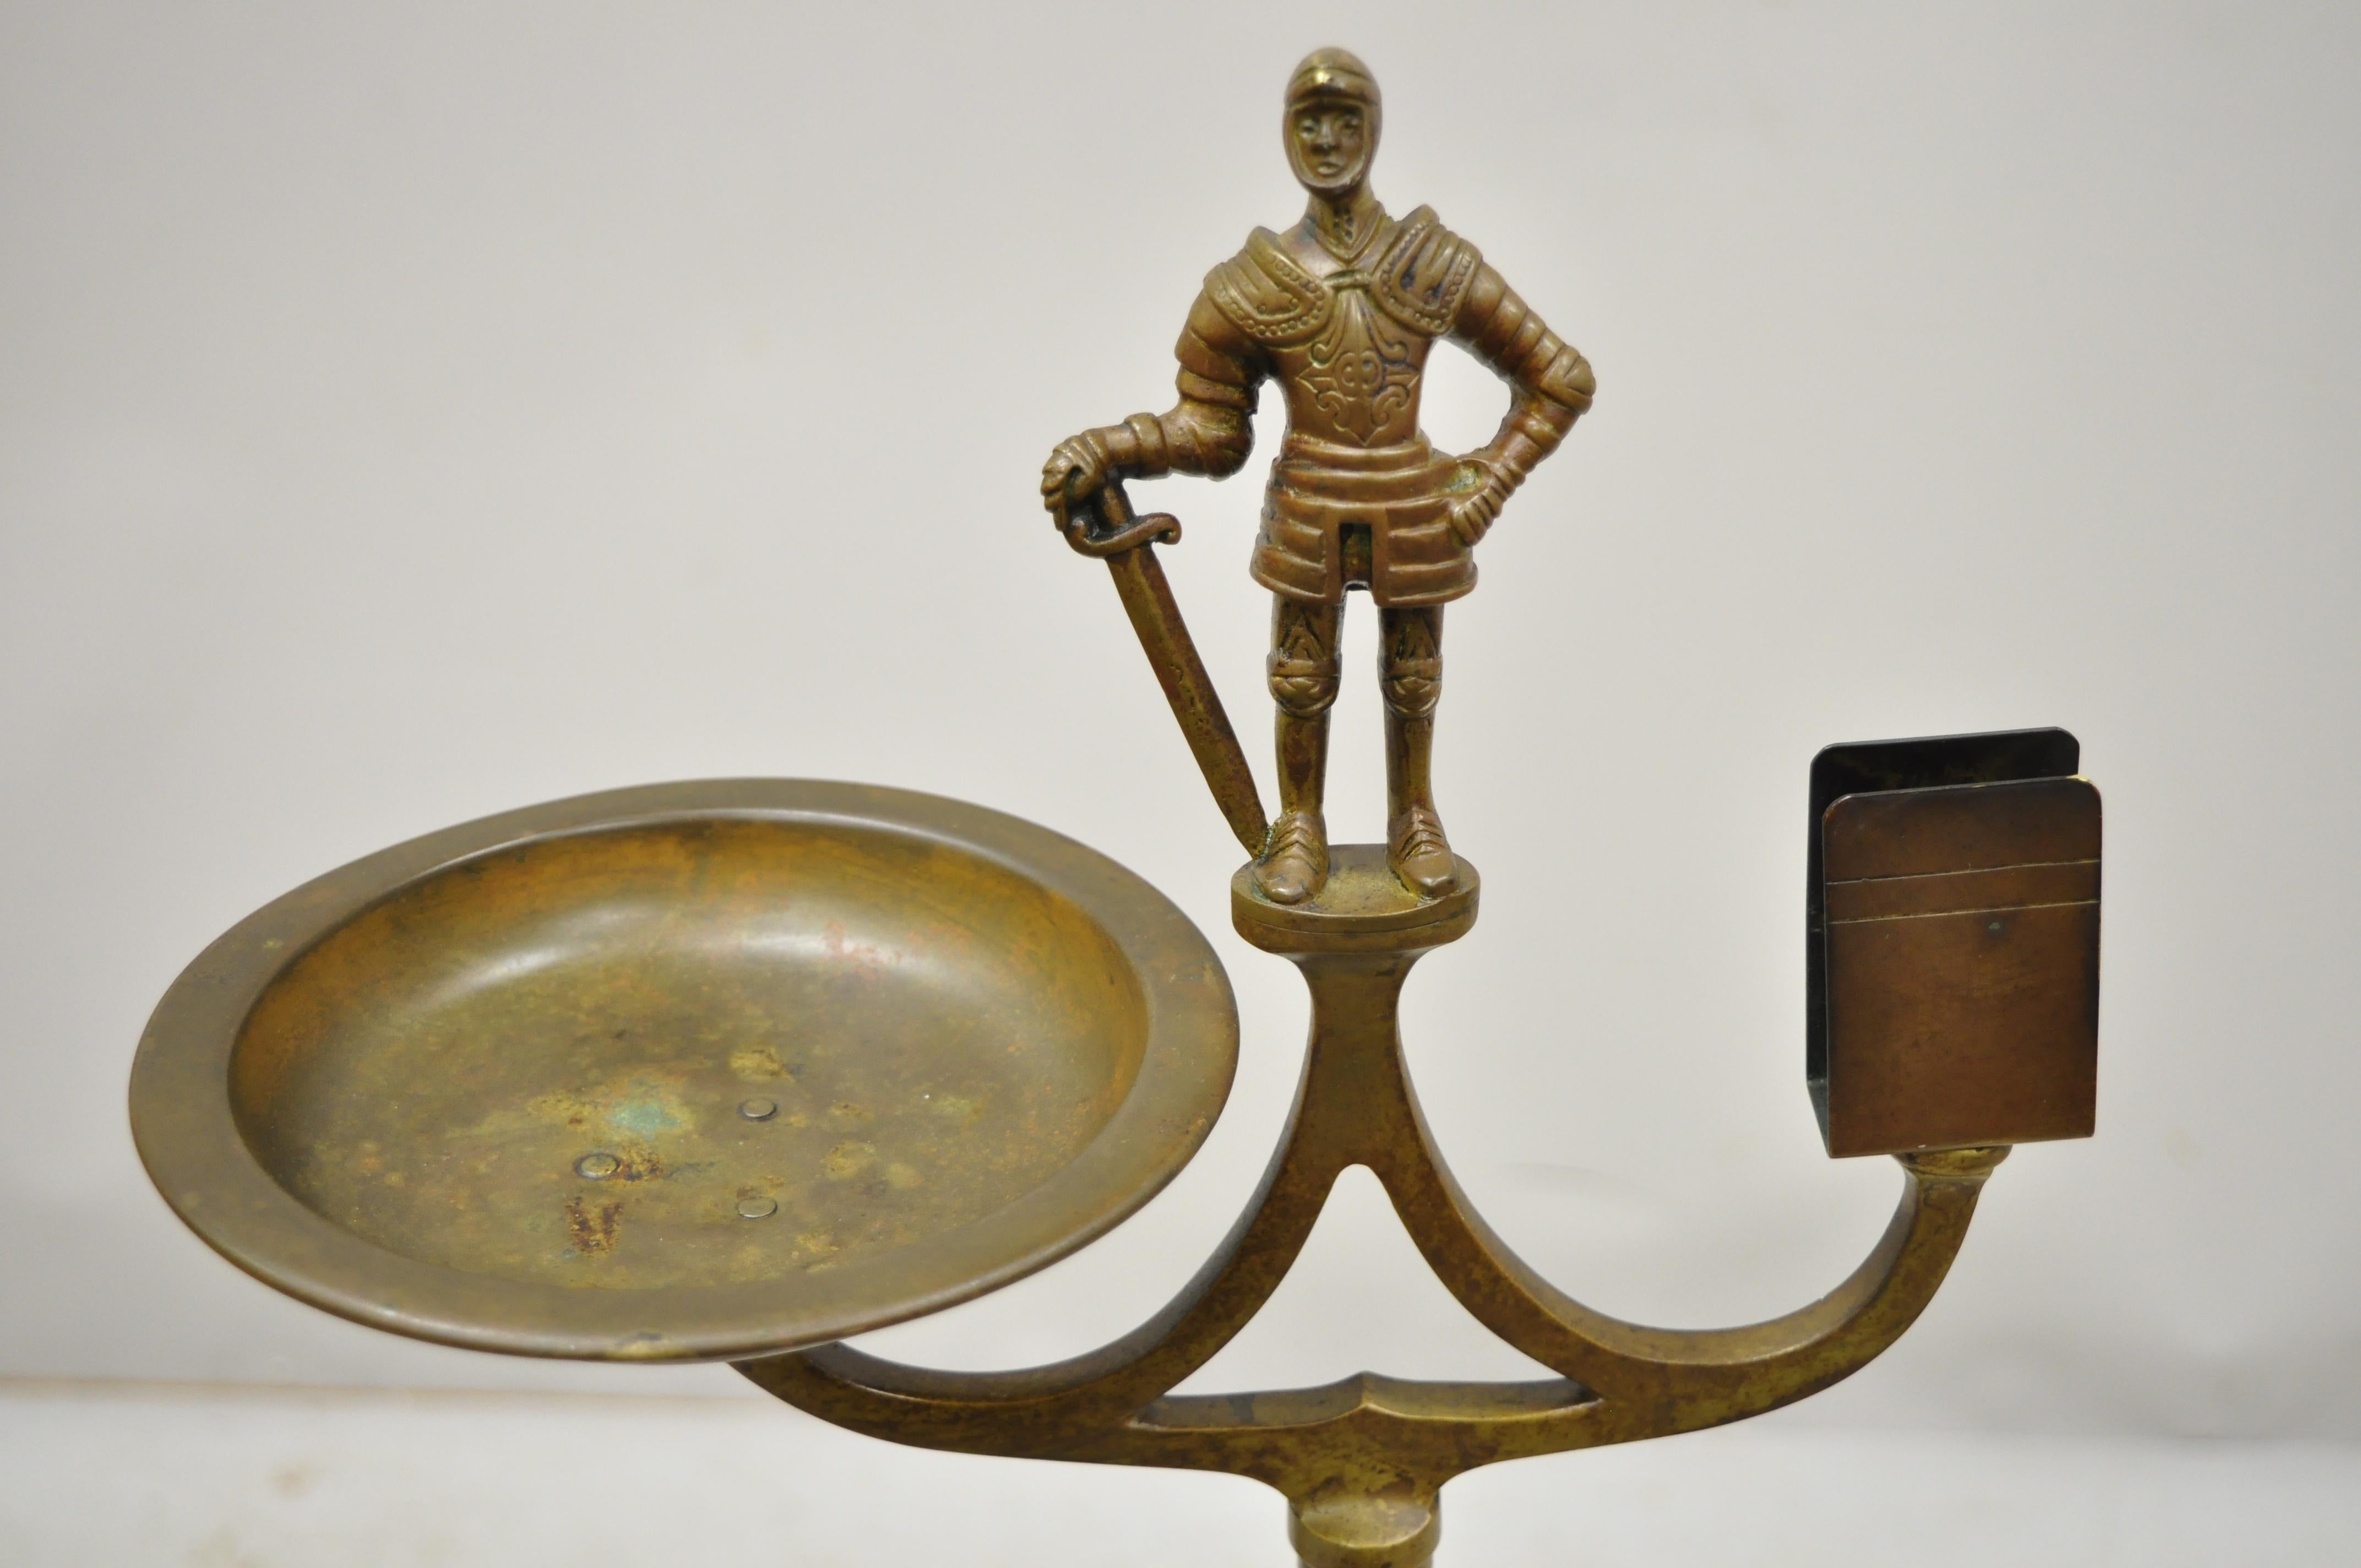 Vintage brass bronze medieval knight figural smoking stand ashtray spiral column, circa early 1900s. Measurements: 34